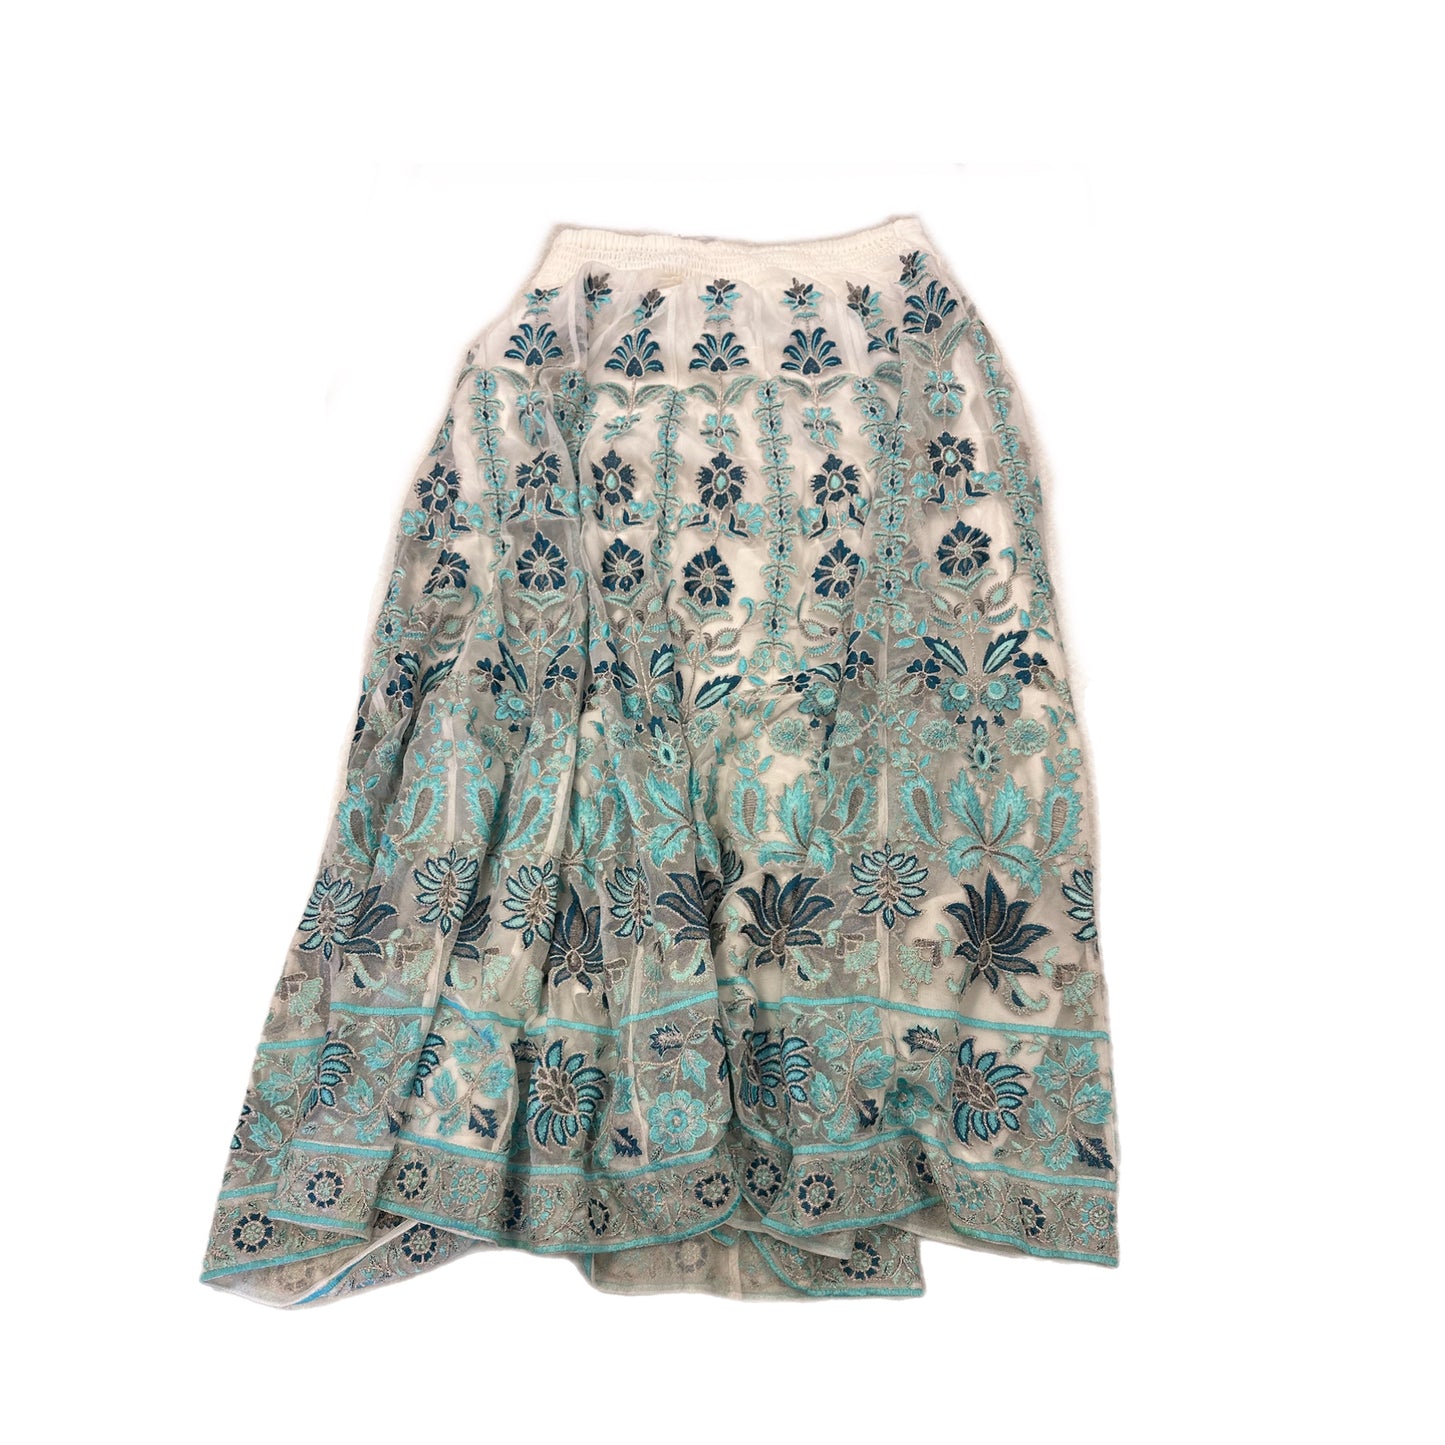 Skirt Maxi By Soft Surroundings  Size: M